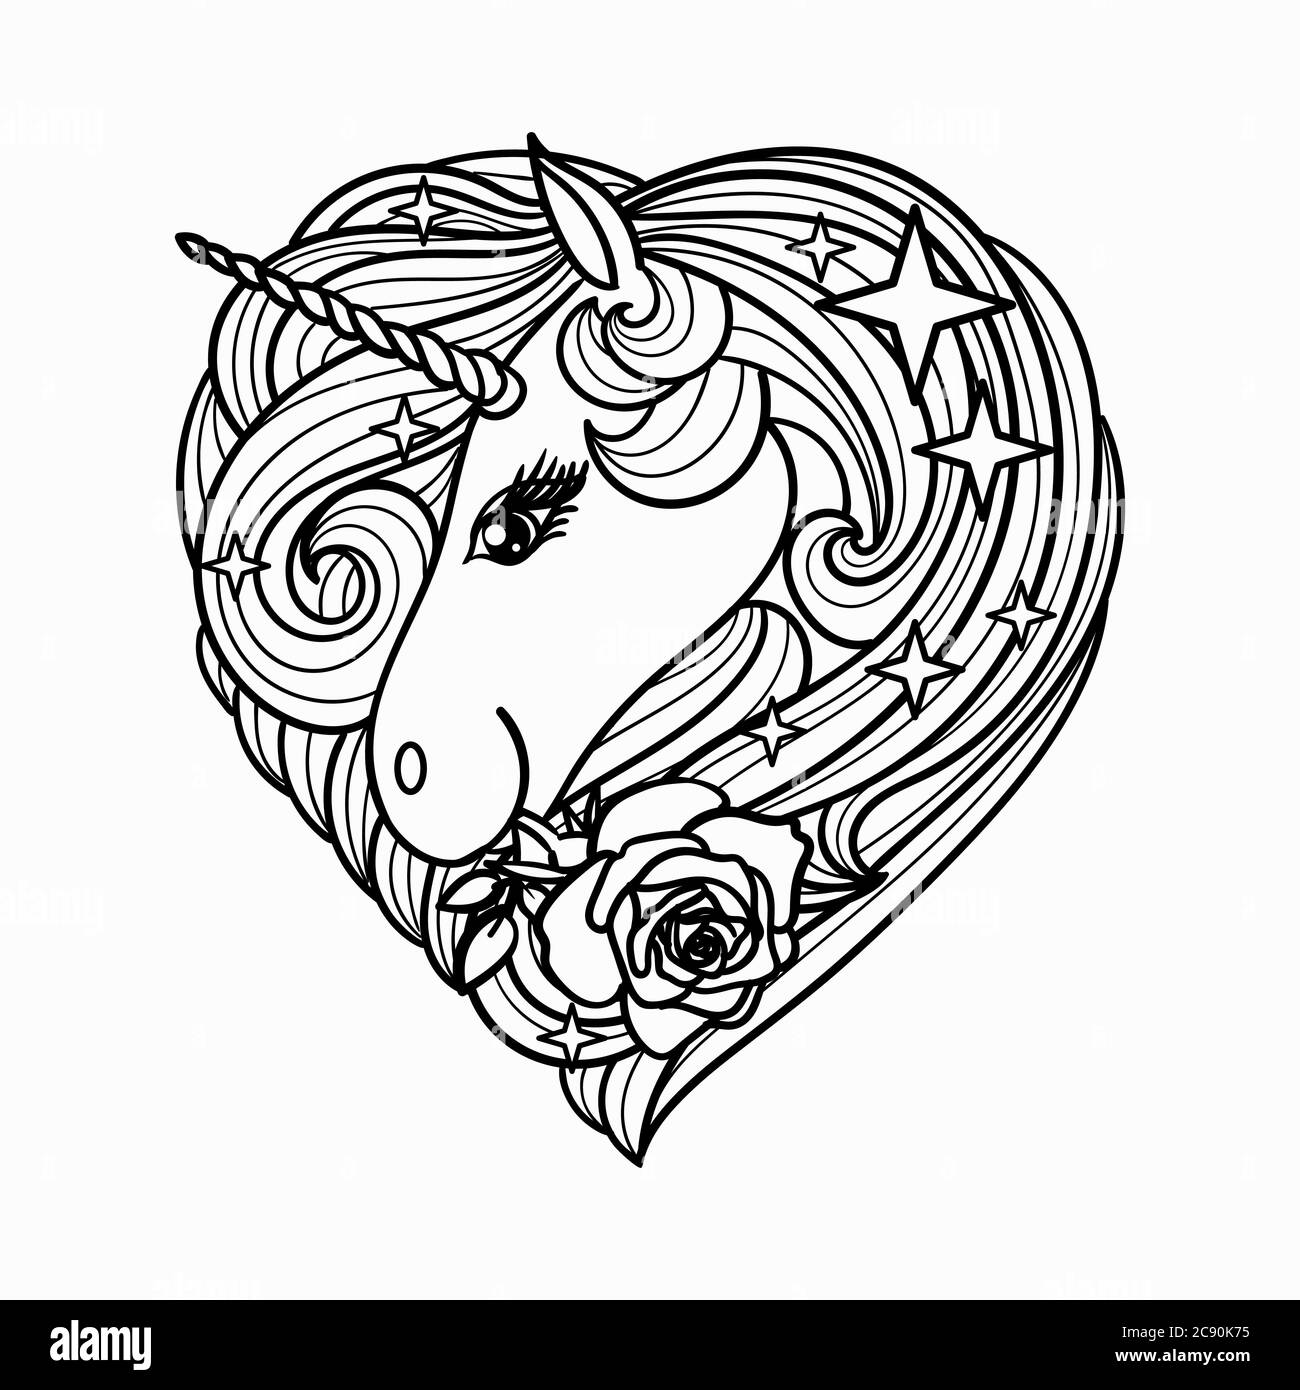 Cartoon Unicorn with a rose. Stylized in the shape of a heart. Hand drawn line illustration. For tattoo design, coloring, prints, posters. Vector Stock Vector